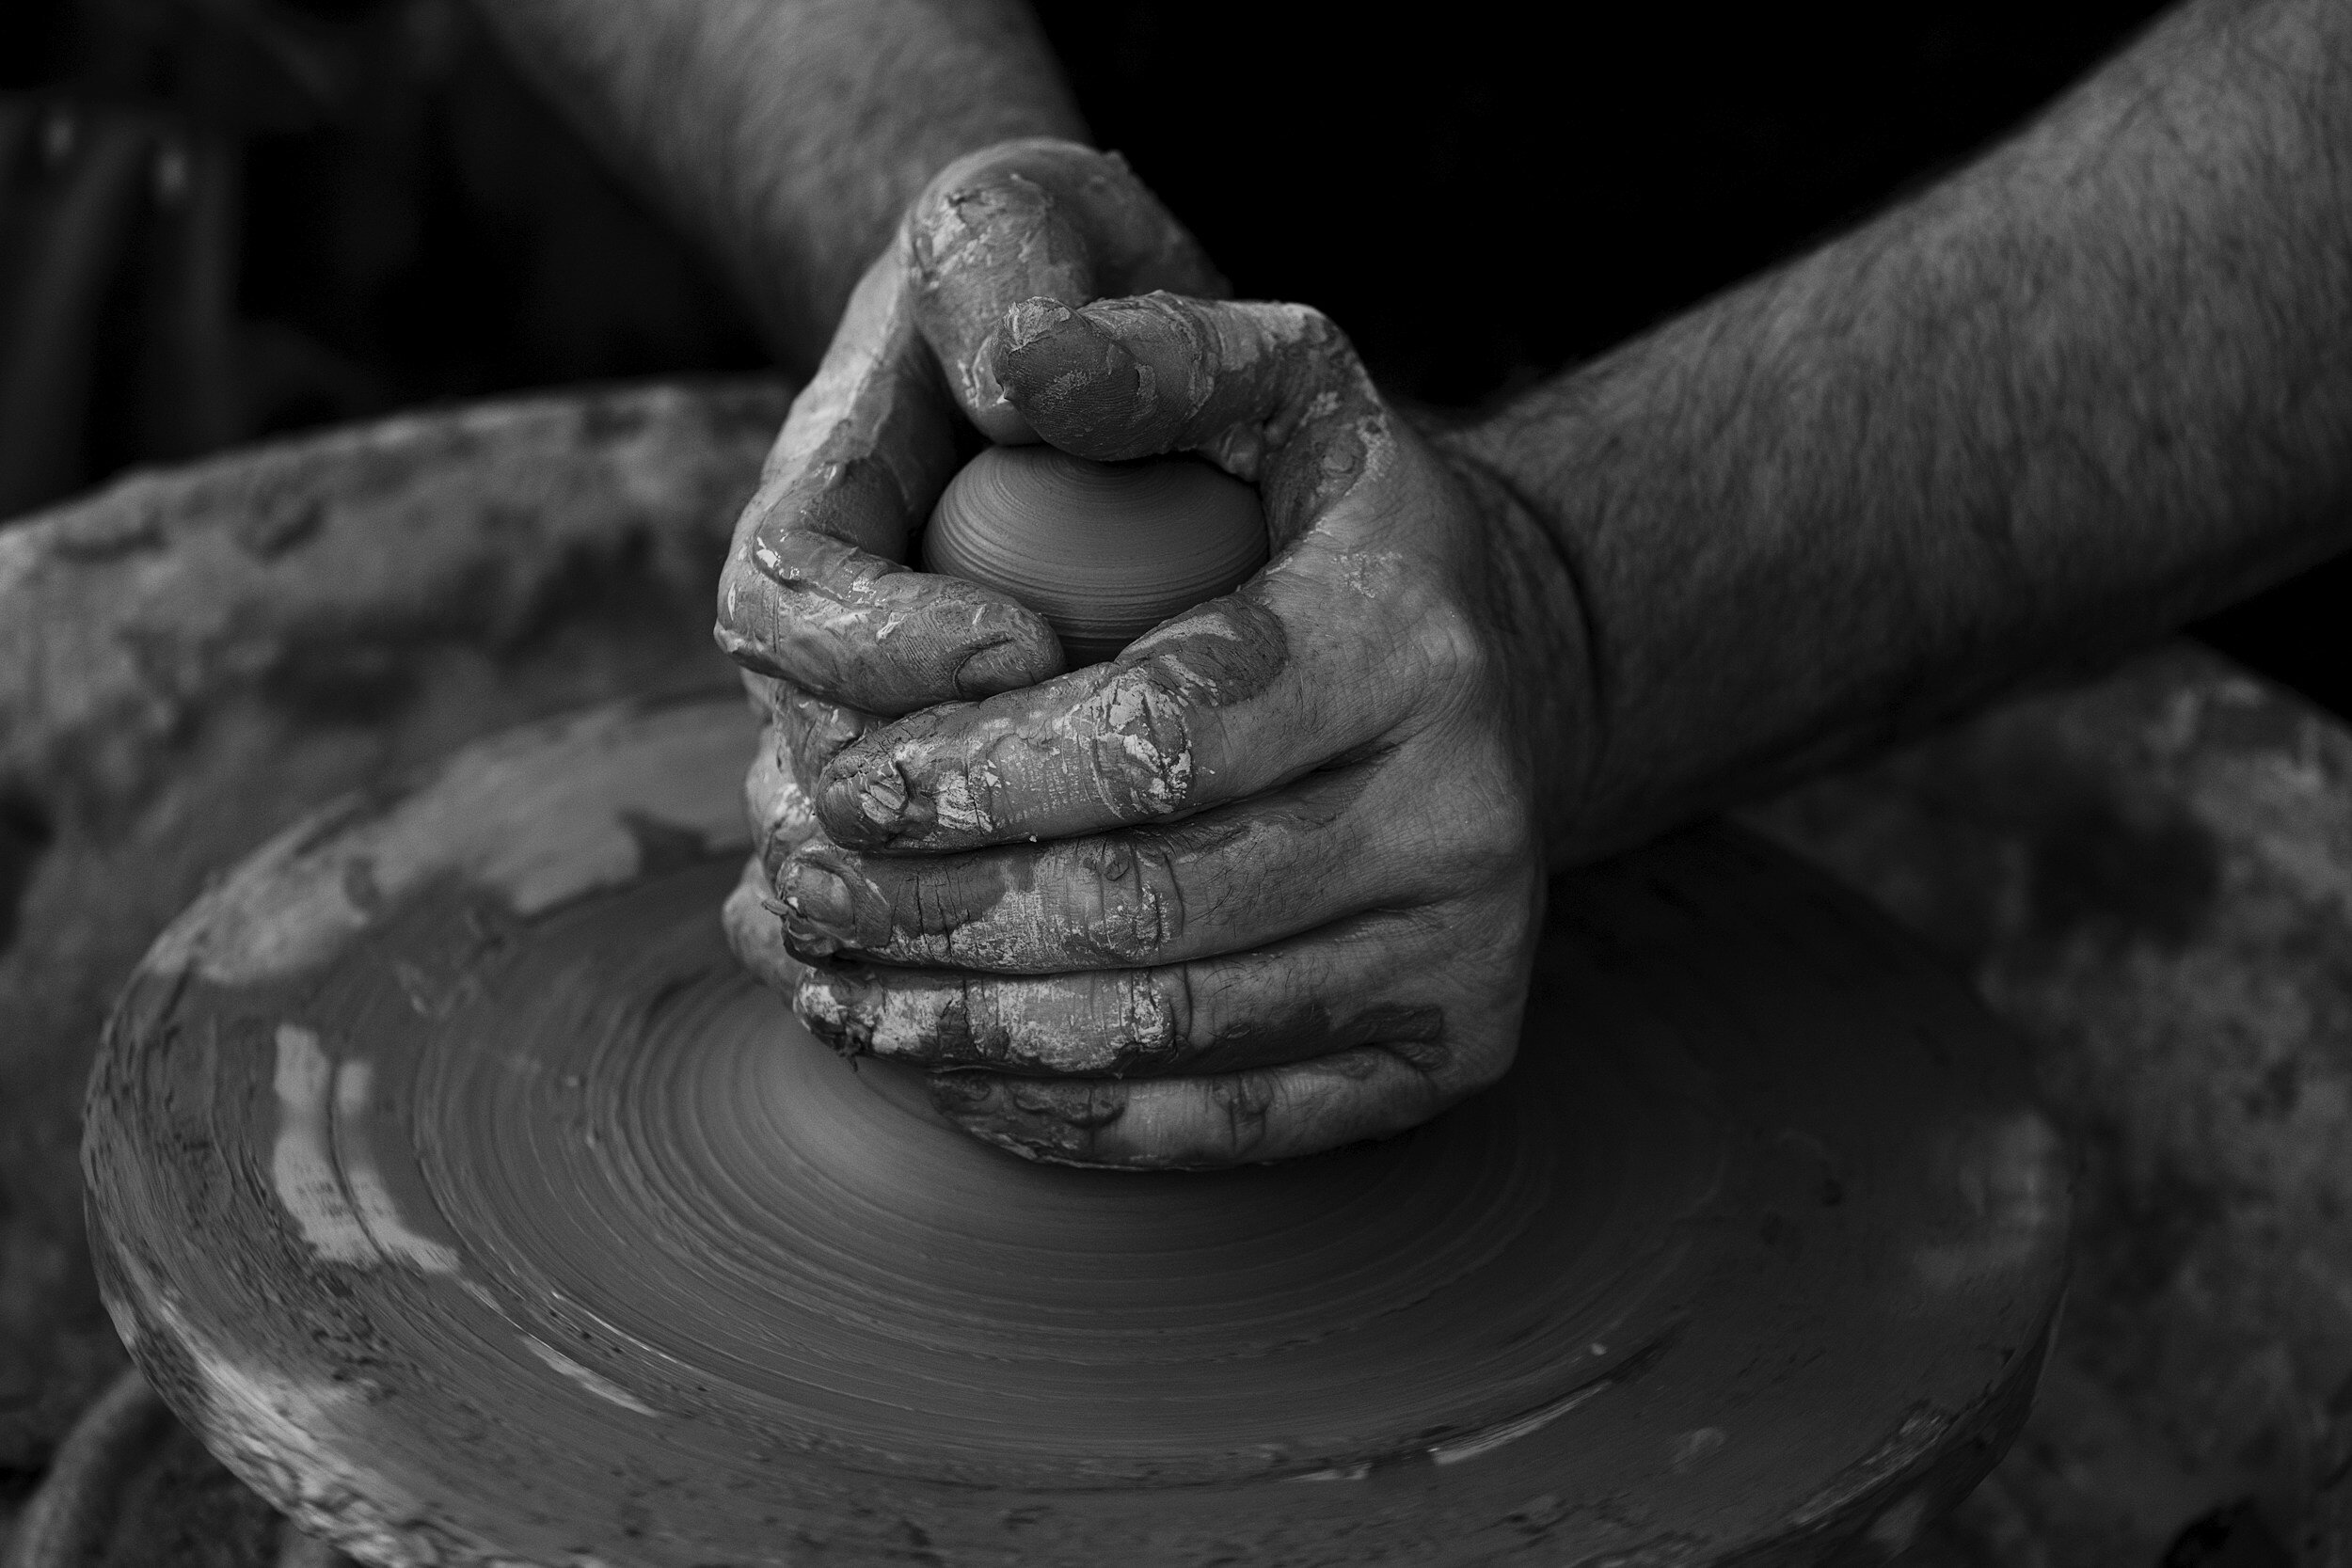 Black and white image of a potter's clay-covered hands shaping a vessel on a spinning pottery wheel.